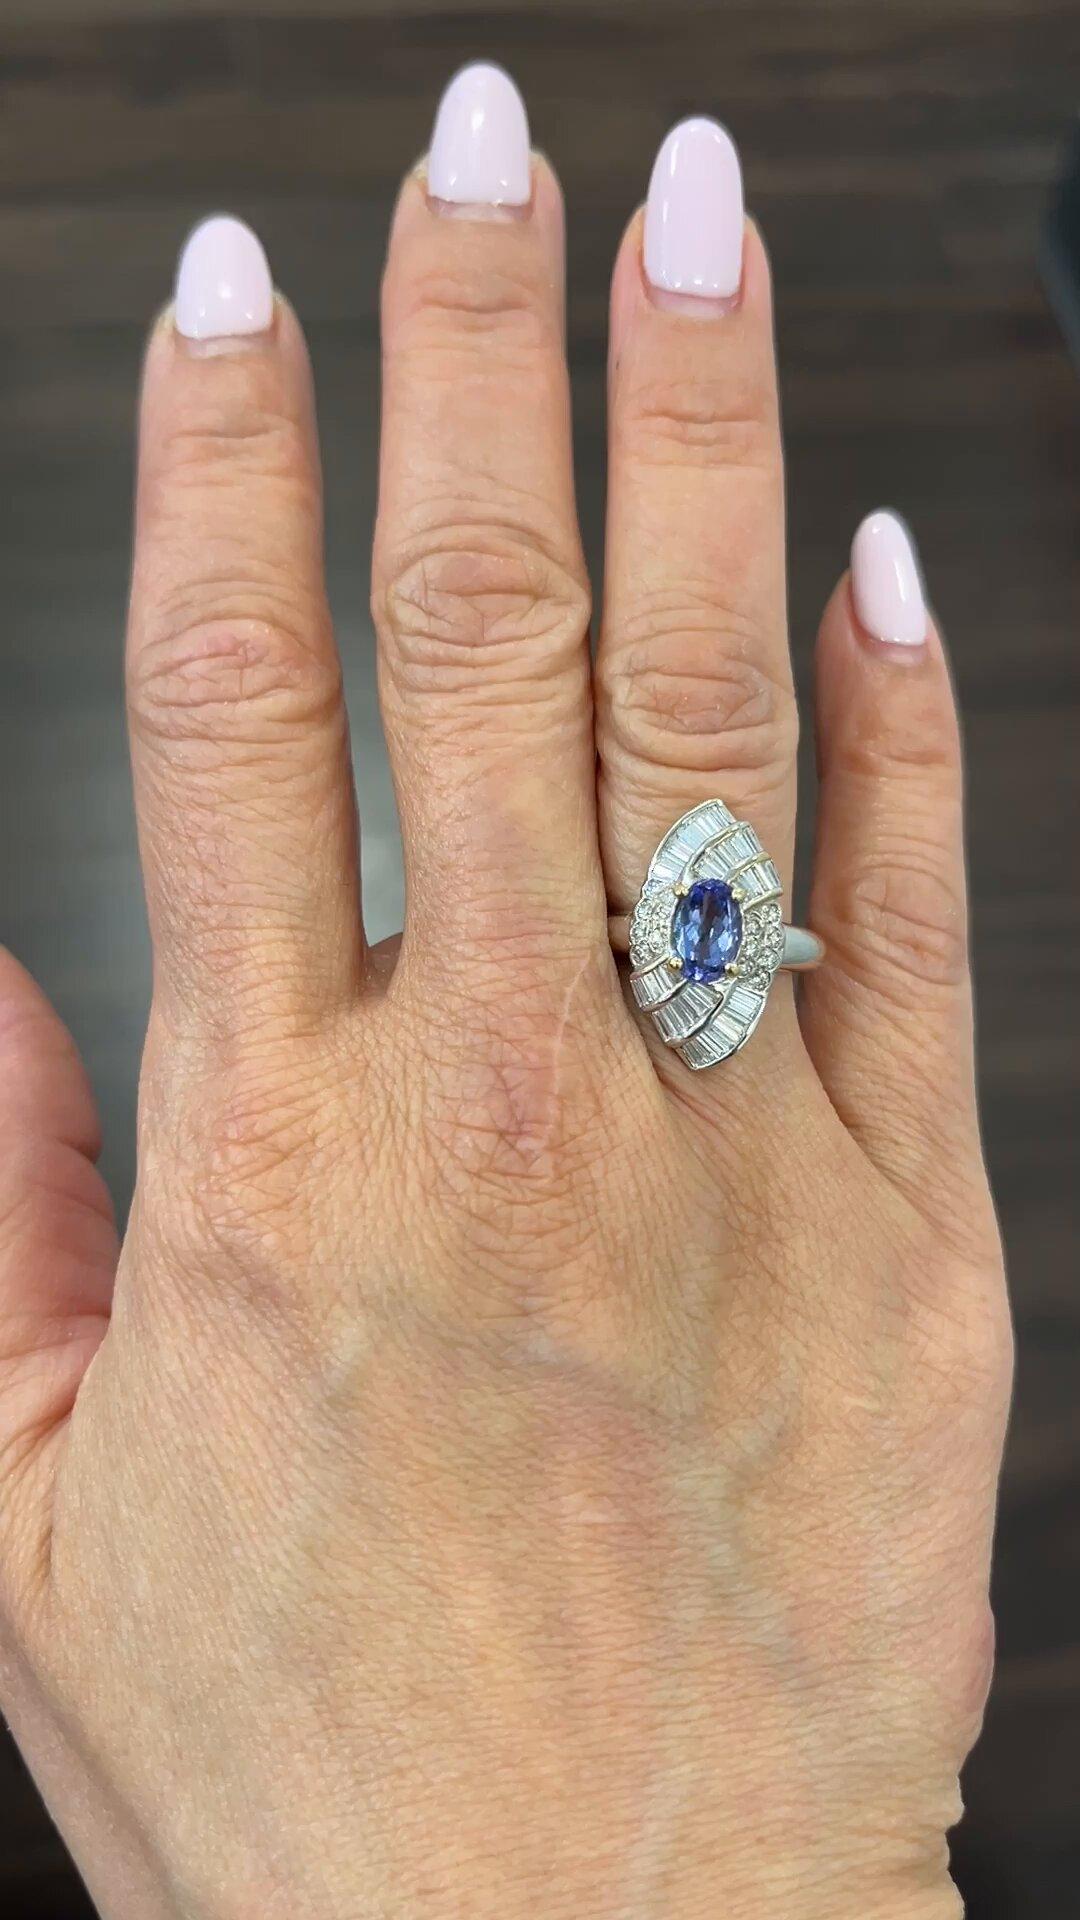 Get ready to dazzle onlookers with this stunning 18k white gold ring. The ring features a beautiful blue tanzanite stone as the main attraction, with a total carat weight of 2.76. The gemstone is further accented by sparkling diamonds, making it a